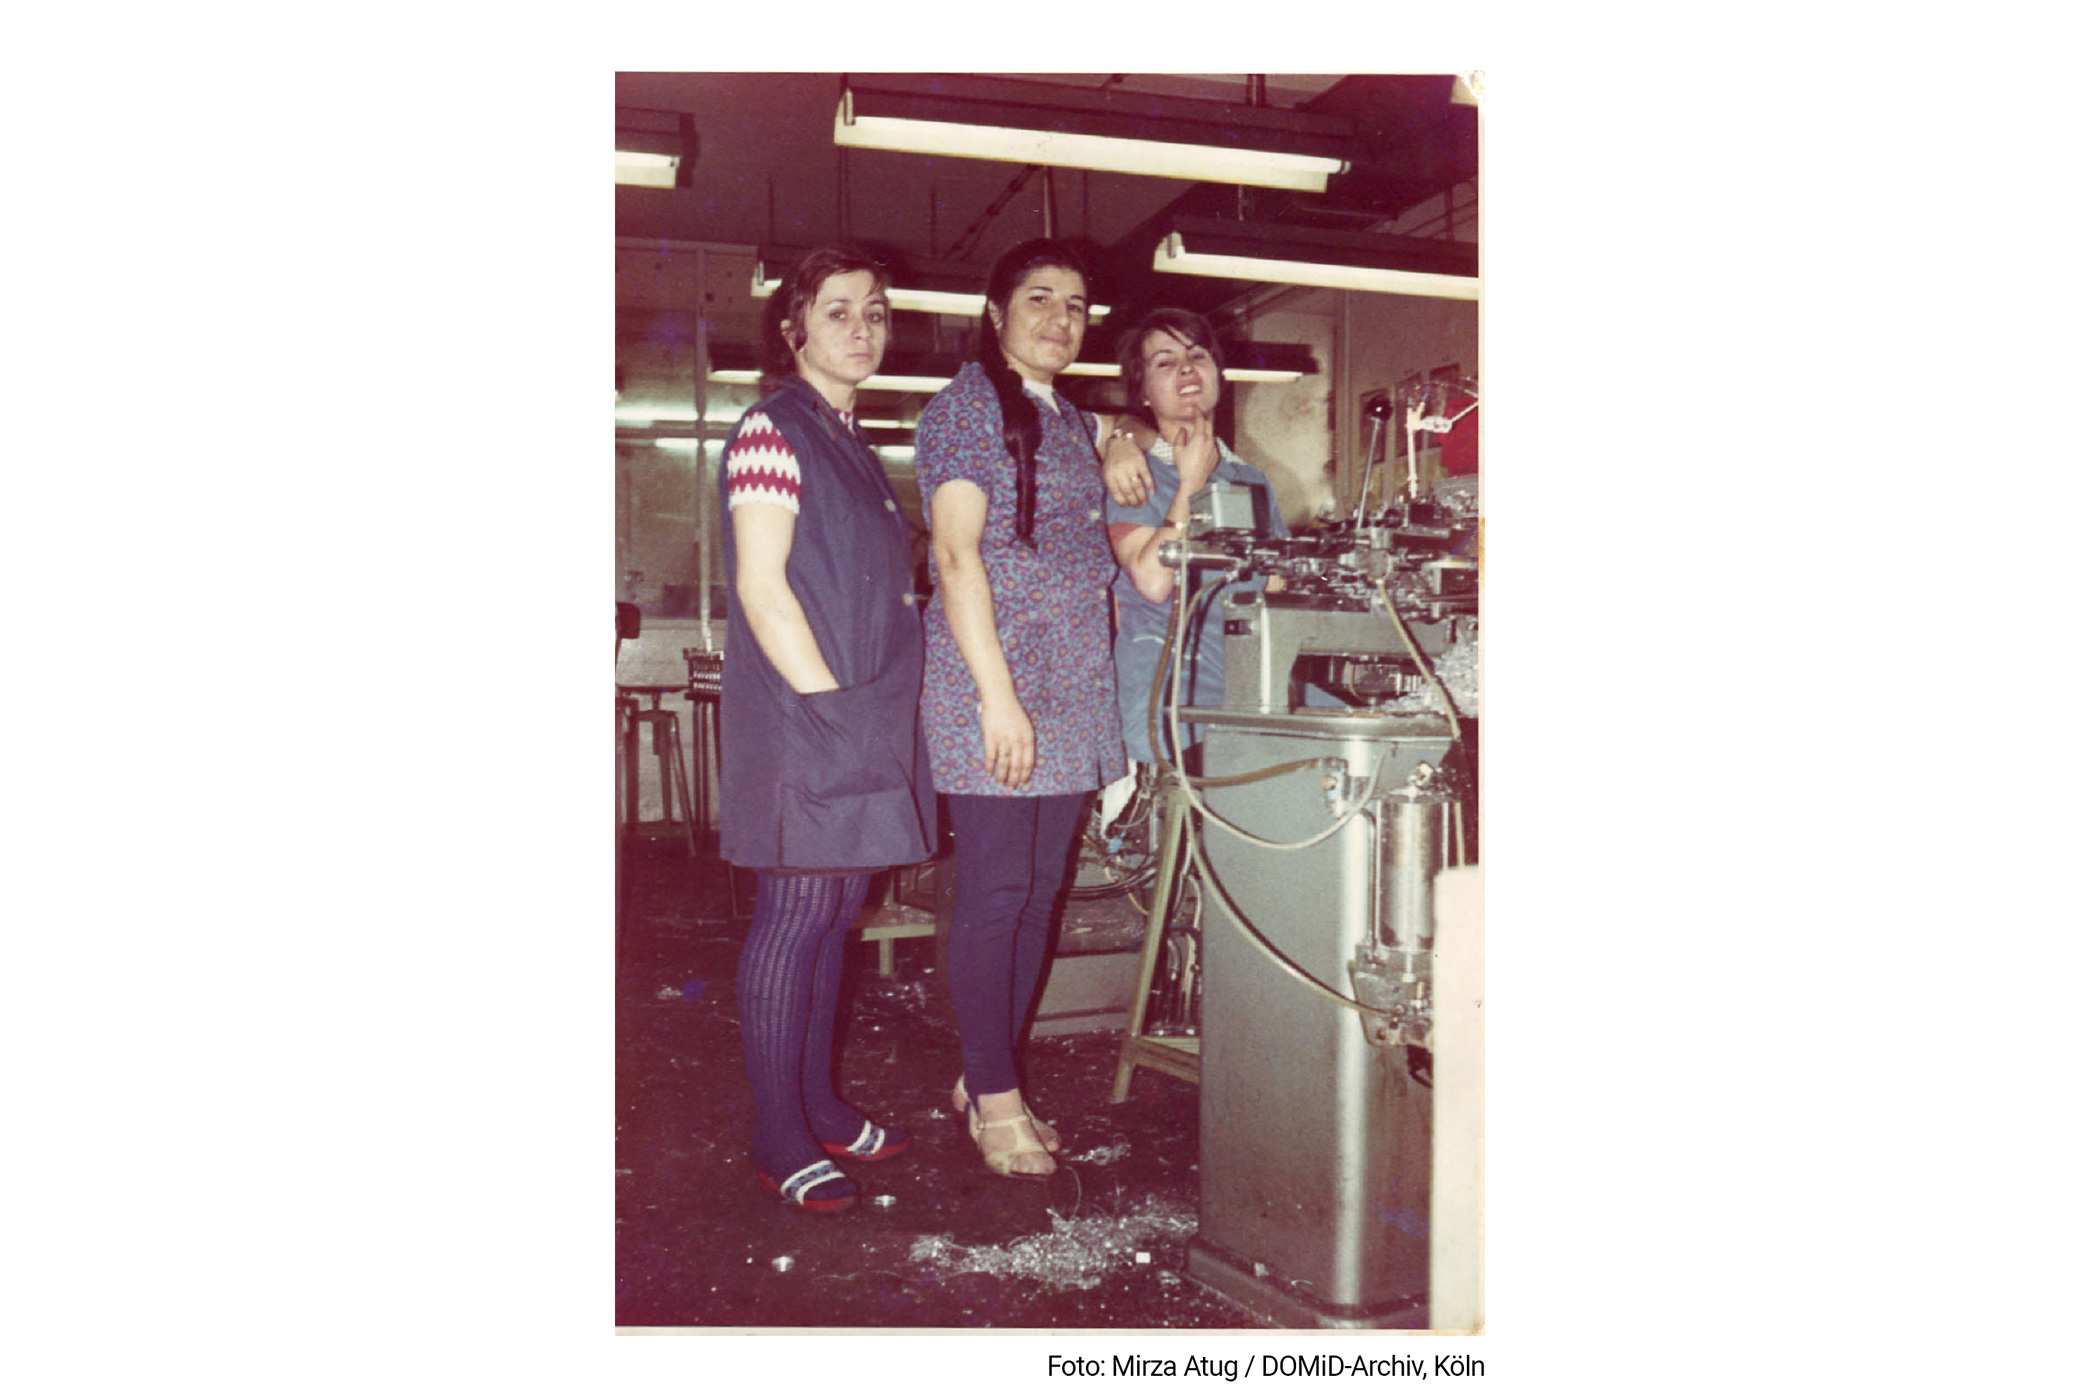 The so-called guest workers were mostly employed in the industrial sector. They were often employed in "gender-specific" jobs, like these women at the Paul Oubrier company, a button manufacturer. The worker in the middle came to Germany alone in 1968 and lived in a women's hostel in Gummersbach.